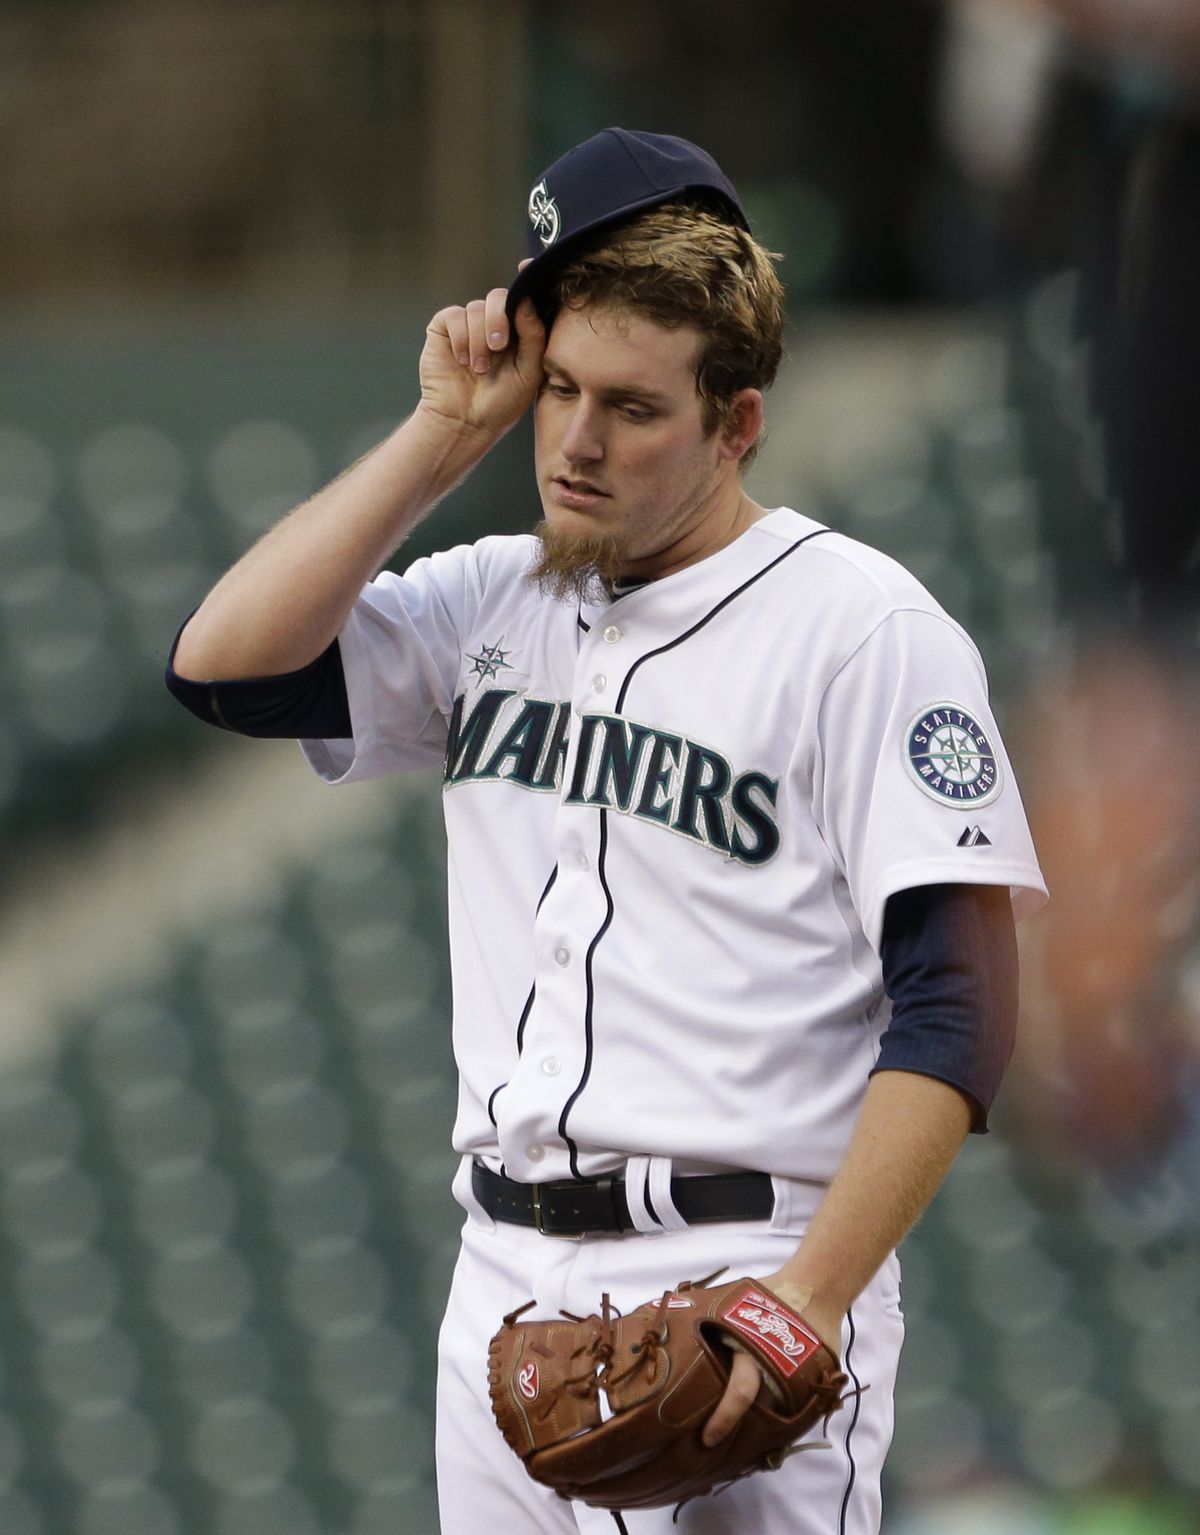 Mariners starter Brandon Maurer adjusts his cap after giving up a first-inning run to the Orioles on Tuesday in Seattle. (Associated Press)